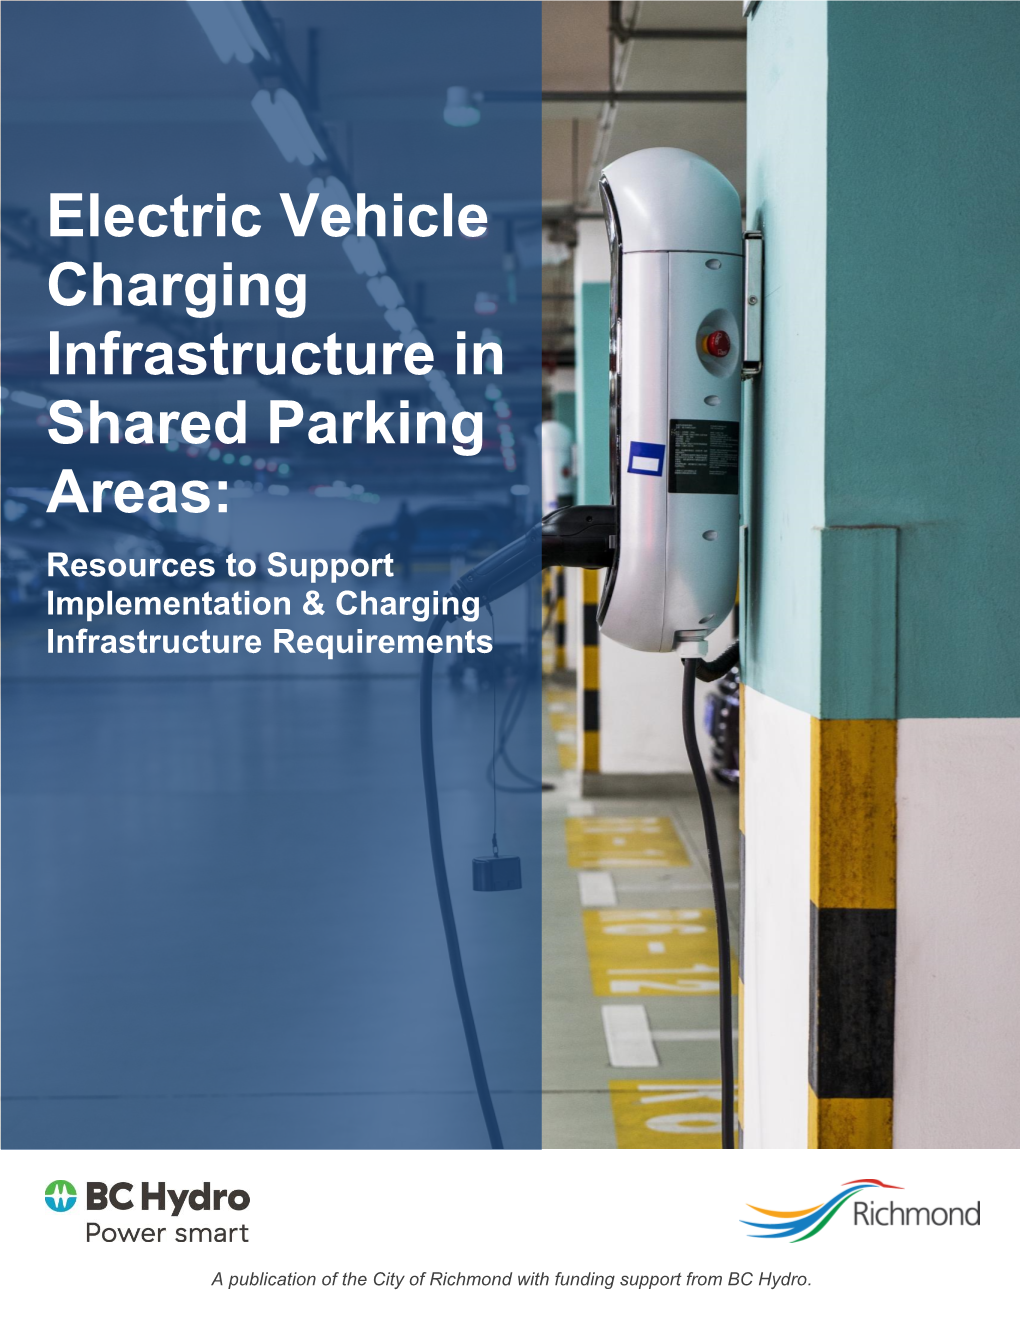 Electric Vehicle Charging Infrastructure in Shared Parking Areas